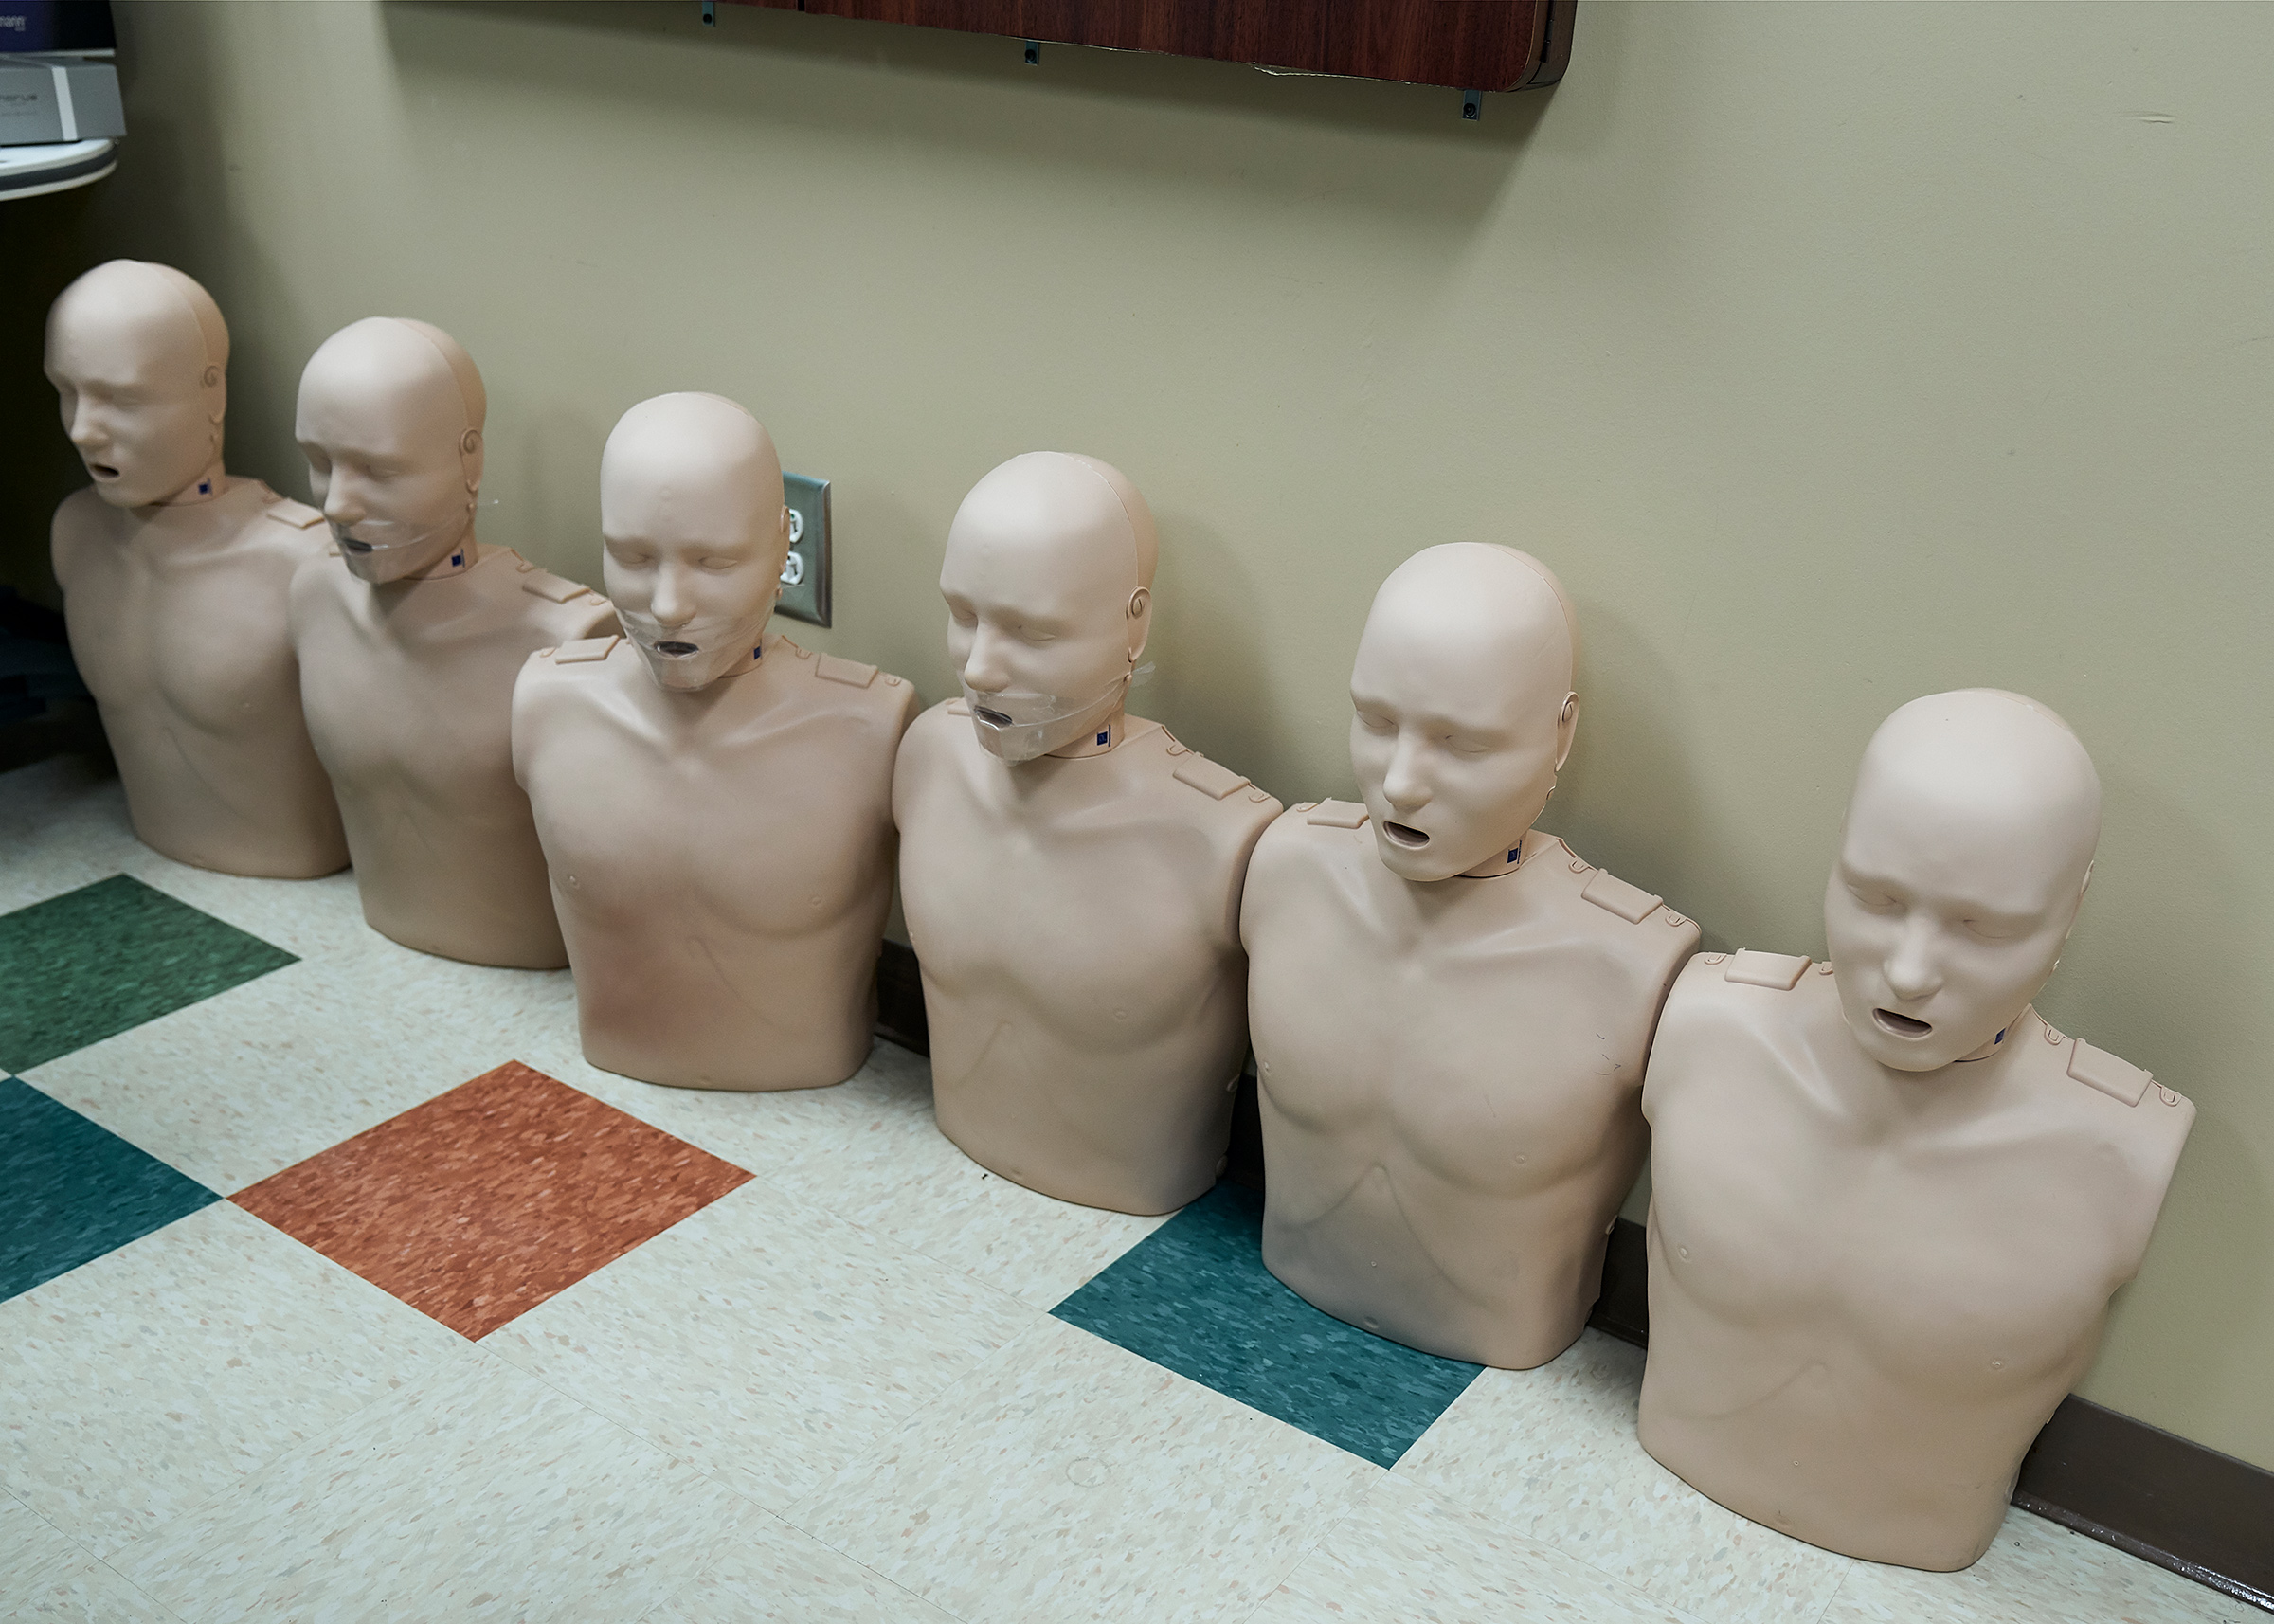 CPR and intubation skills equipment at Clinch Memorial Hospital. (Stacy Kranitz for TIME)